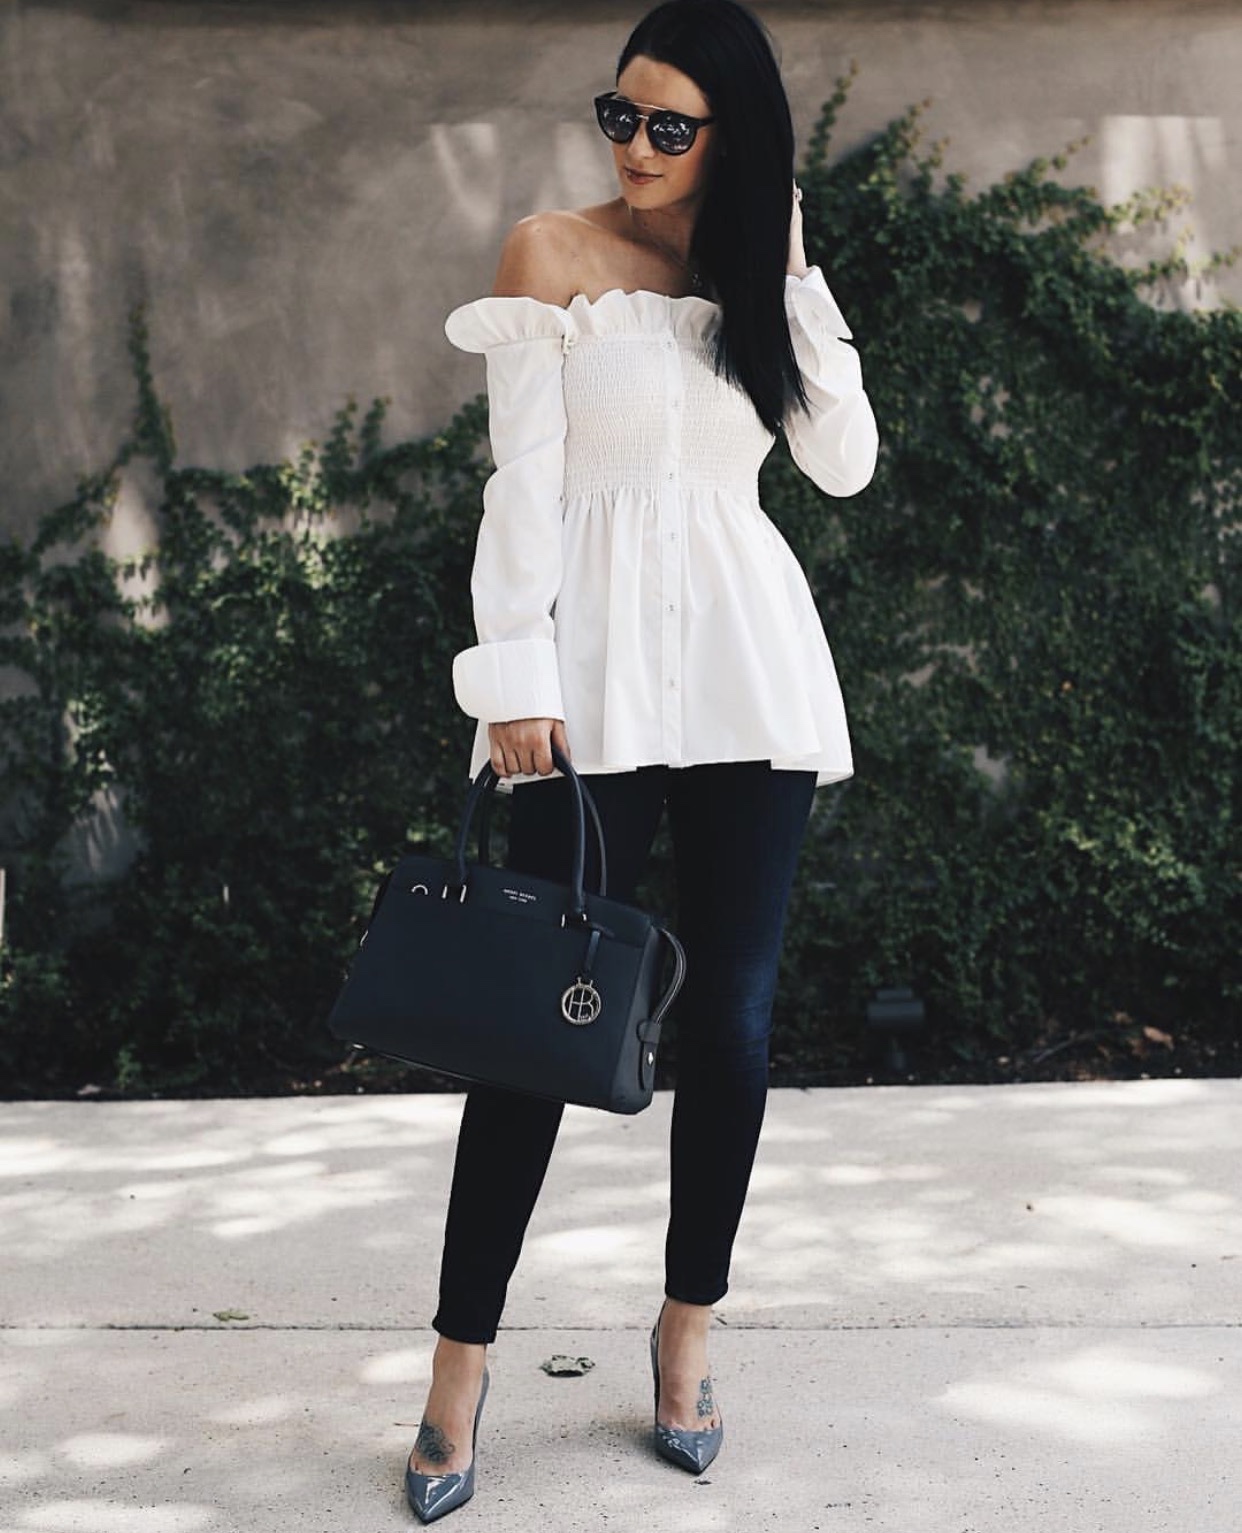 Instagram Outfit Roundup - Favorite August Looks | Fall fashion tips | Fall outfit ideas | Fall style tips | what to wear for Fall | cold weather fashion | fashion for fall | style tips for fall | outfit ideas for fall || Dressed to Kill